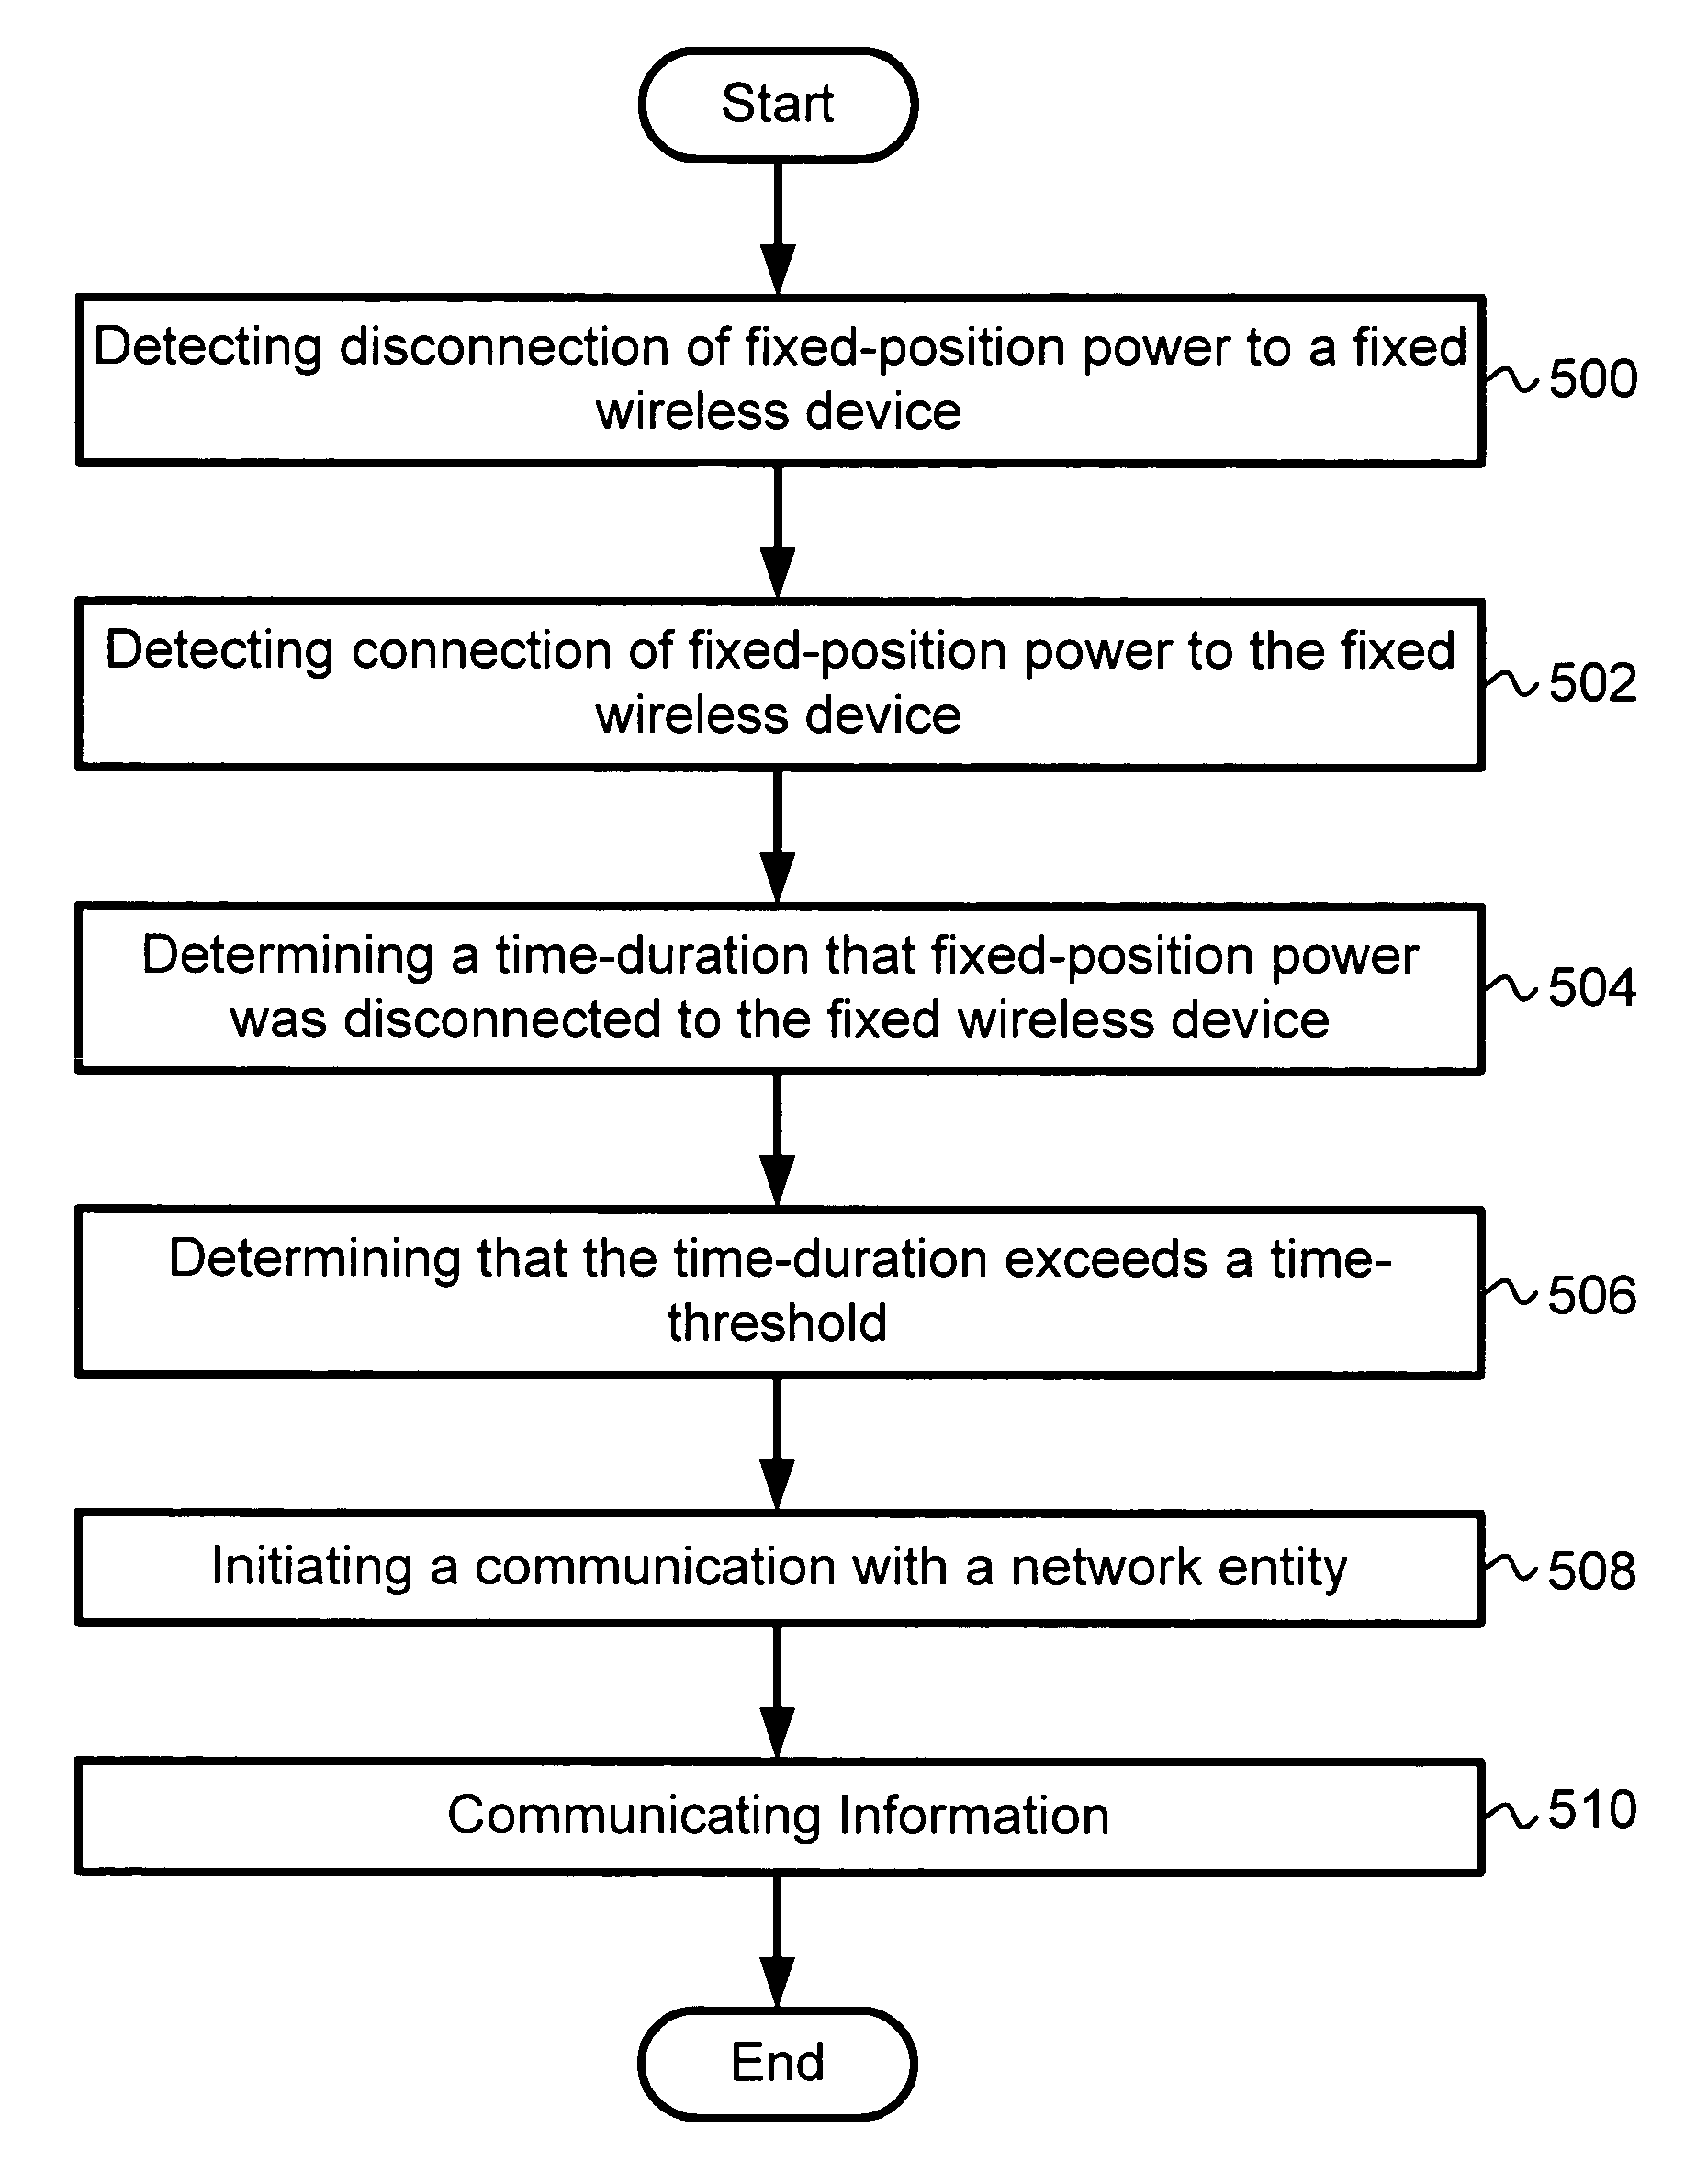 Method and system for initiating a communication with a network entity to communicate information regarding a fixed wireless device